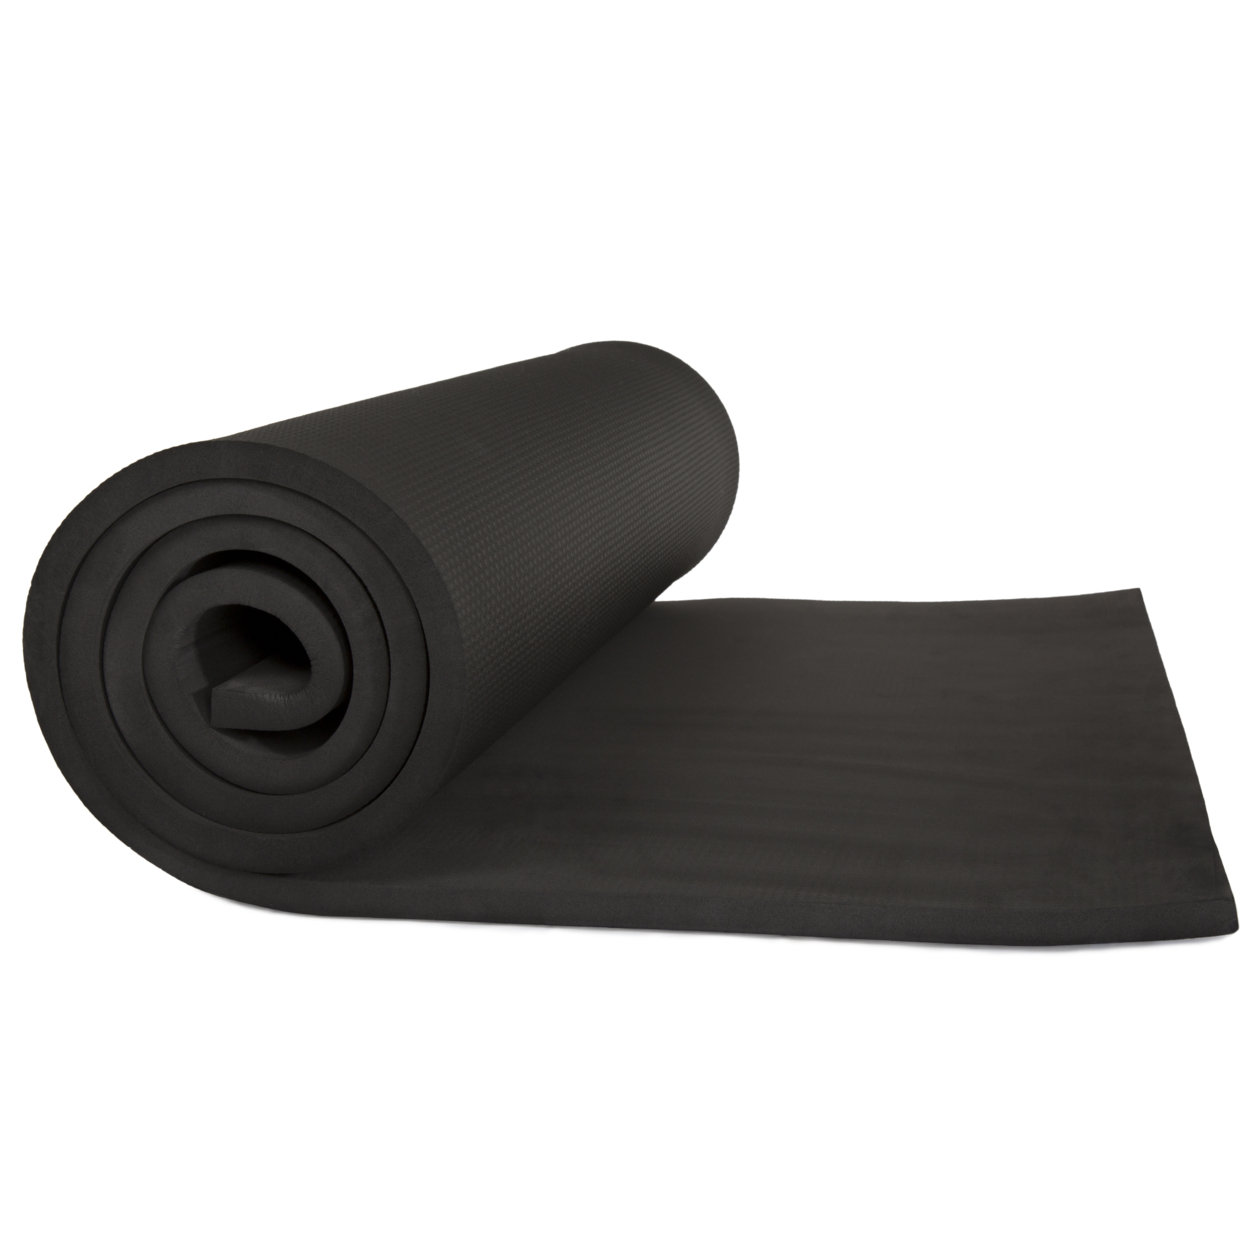 Wakeman Fitness Thick Foam Exercise Yoga Mat - 72 X 24 X .50 Inches Roll Up For Easy Travel